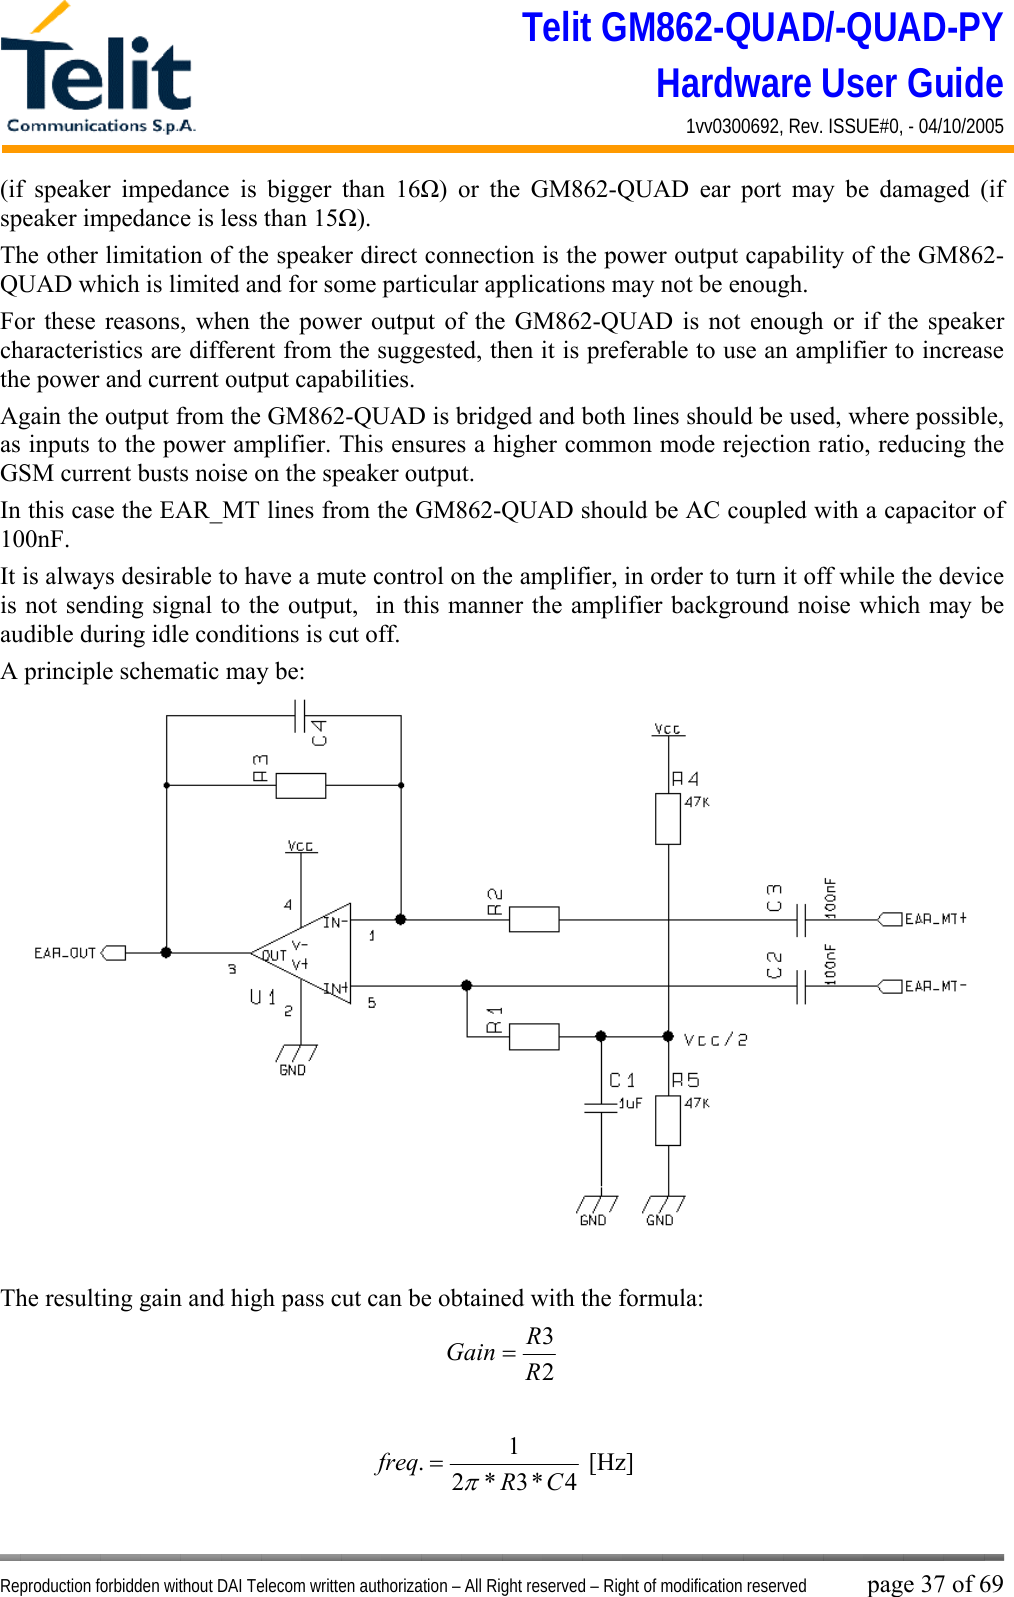 Telit GM862-QUAD/-QUAD-PY Hardware User Guide 1vv0300692, Rev. ISSUE#0, - 04/10/2005   Reproduction forbidden without DAI Telecom written authorization – All Right reserved – Right of modification reserved page 37 of 69 (if speaker impedance is bigger than 16Ω) or the GM862-QUAD ear port may be damaged (if speaker impedance is less than 15Ω). The other limitation of the speaker direct connection is the power output capability of the GM862-QUAD which is limited and for some particular applications may not be enough. For these reasons, when the power output of the GM862-QUAD is not enough or if the speaker characteristics are different from the suggested, then it is preferable to use an amplifier to increase the power and current output capabilities.  Again the output from the GM862-QUAD is bridged and both lines should be used, where possible, as inputs to the power amplifier. This ensures a higher common mode rejection ratio, reducing the GSM current busts noise on the speaker output. In this case the EAR_MT lines from the GM862-QUAD should be AC coupled with a capacitor of 100nF. It is always desirable to have a mute control on the amplifier, in order to turn it off while the device is not sending signal to the output,  in this manner the amplifier background noise which may be audible during idle conditions is cut off. A principle schematic may be:  The resulting gain and high pass cut can be obtained with the formula: 23RRGain =  4*3*21.CRfreqπ= [Hz] 